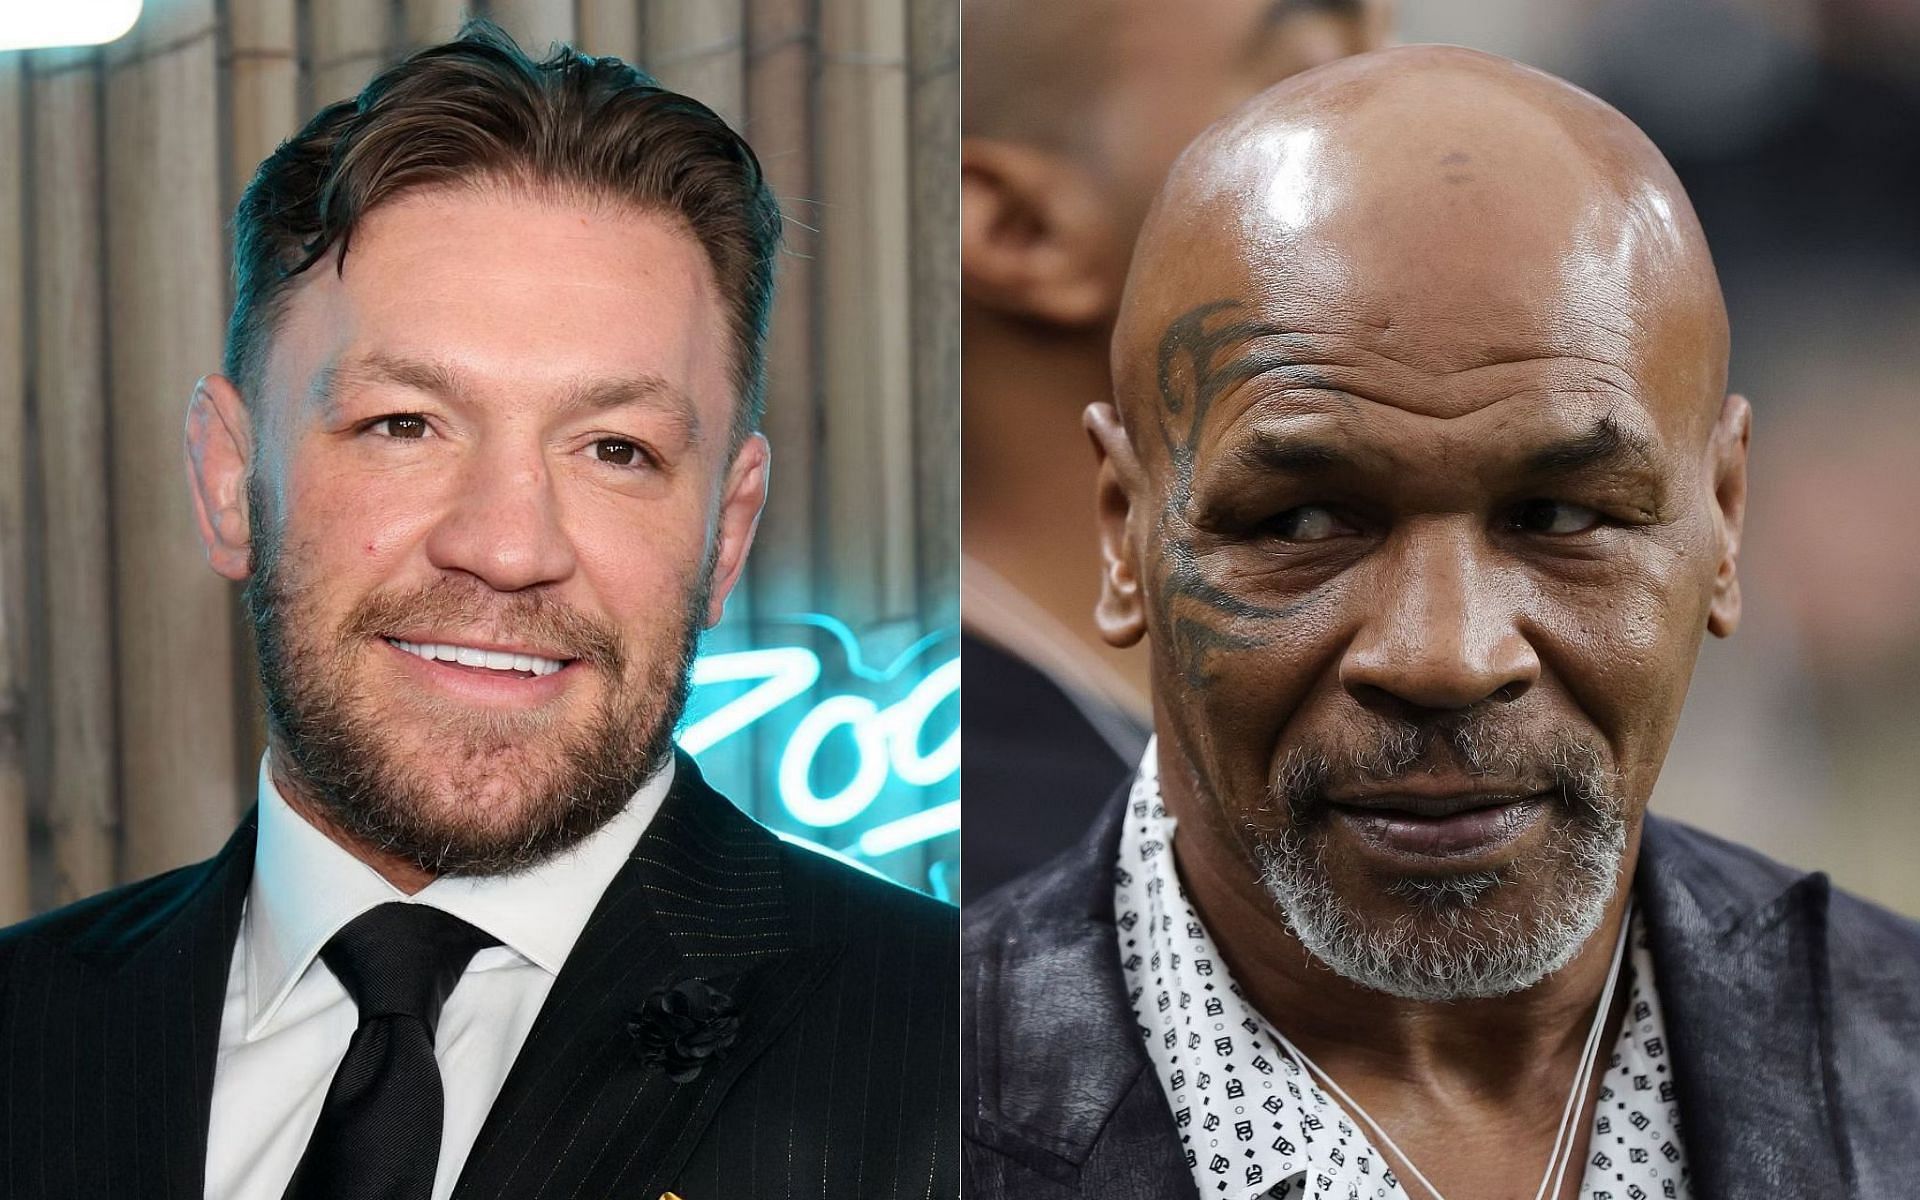 Conor McGregor (left) speaks about Mike Tyson (right) [Images via Getty]